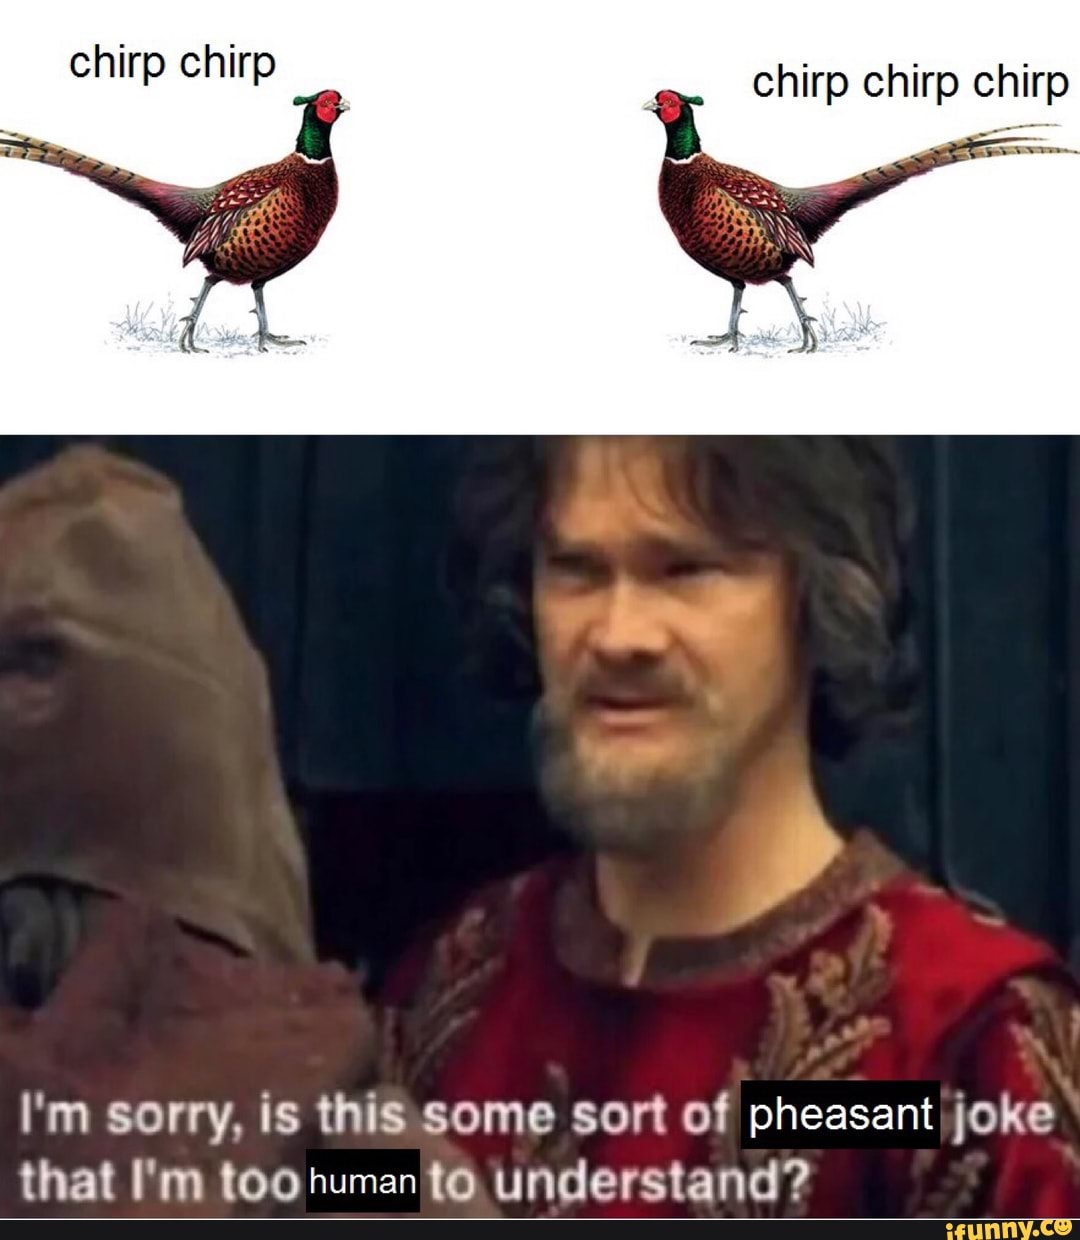 I'm sorry, is this some sort of pheasant joke that I'm ...